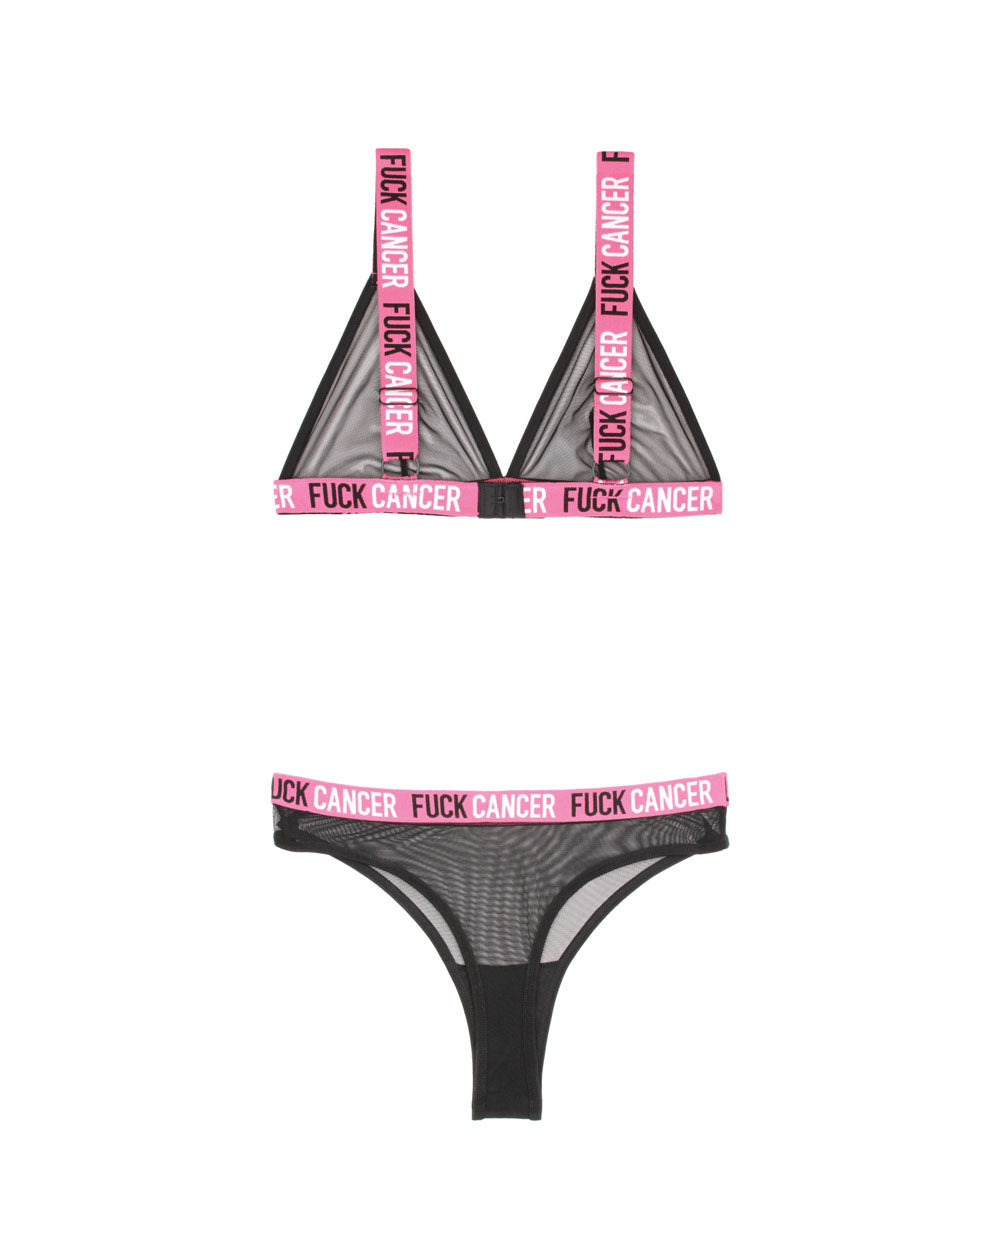 Fuck Cancer Bralette and Cheeky Panty Set - Black - L-xl